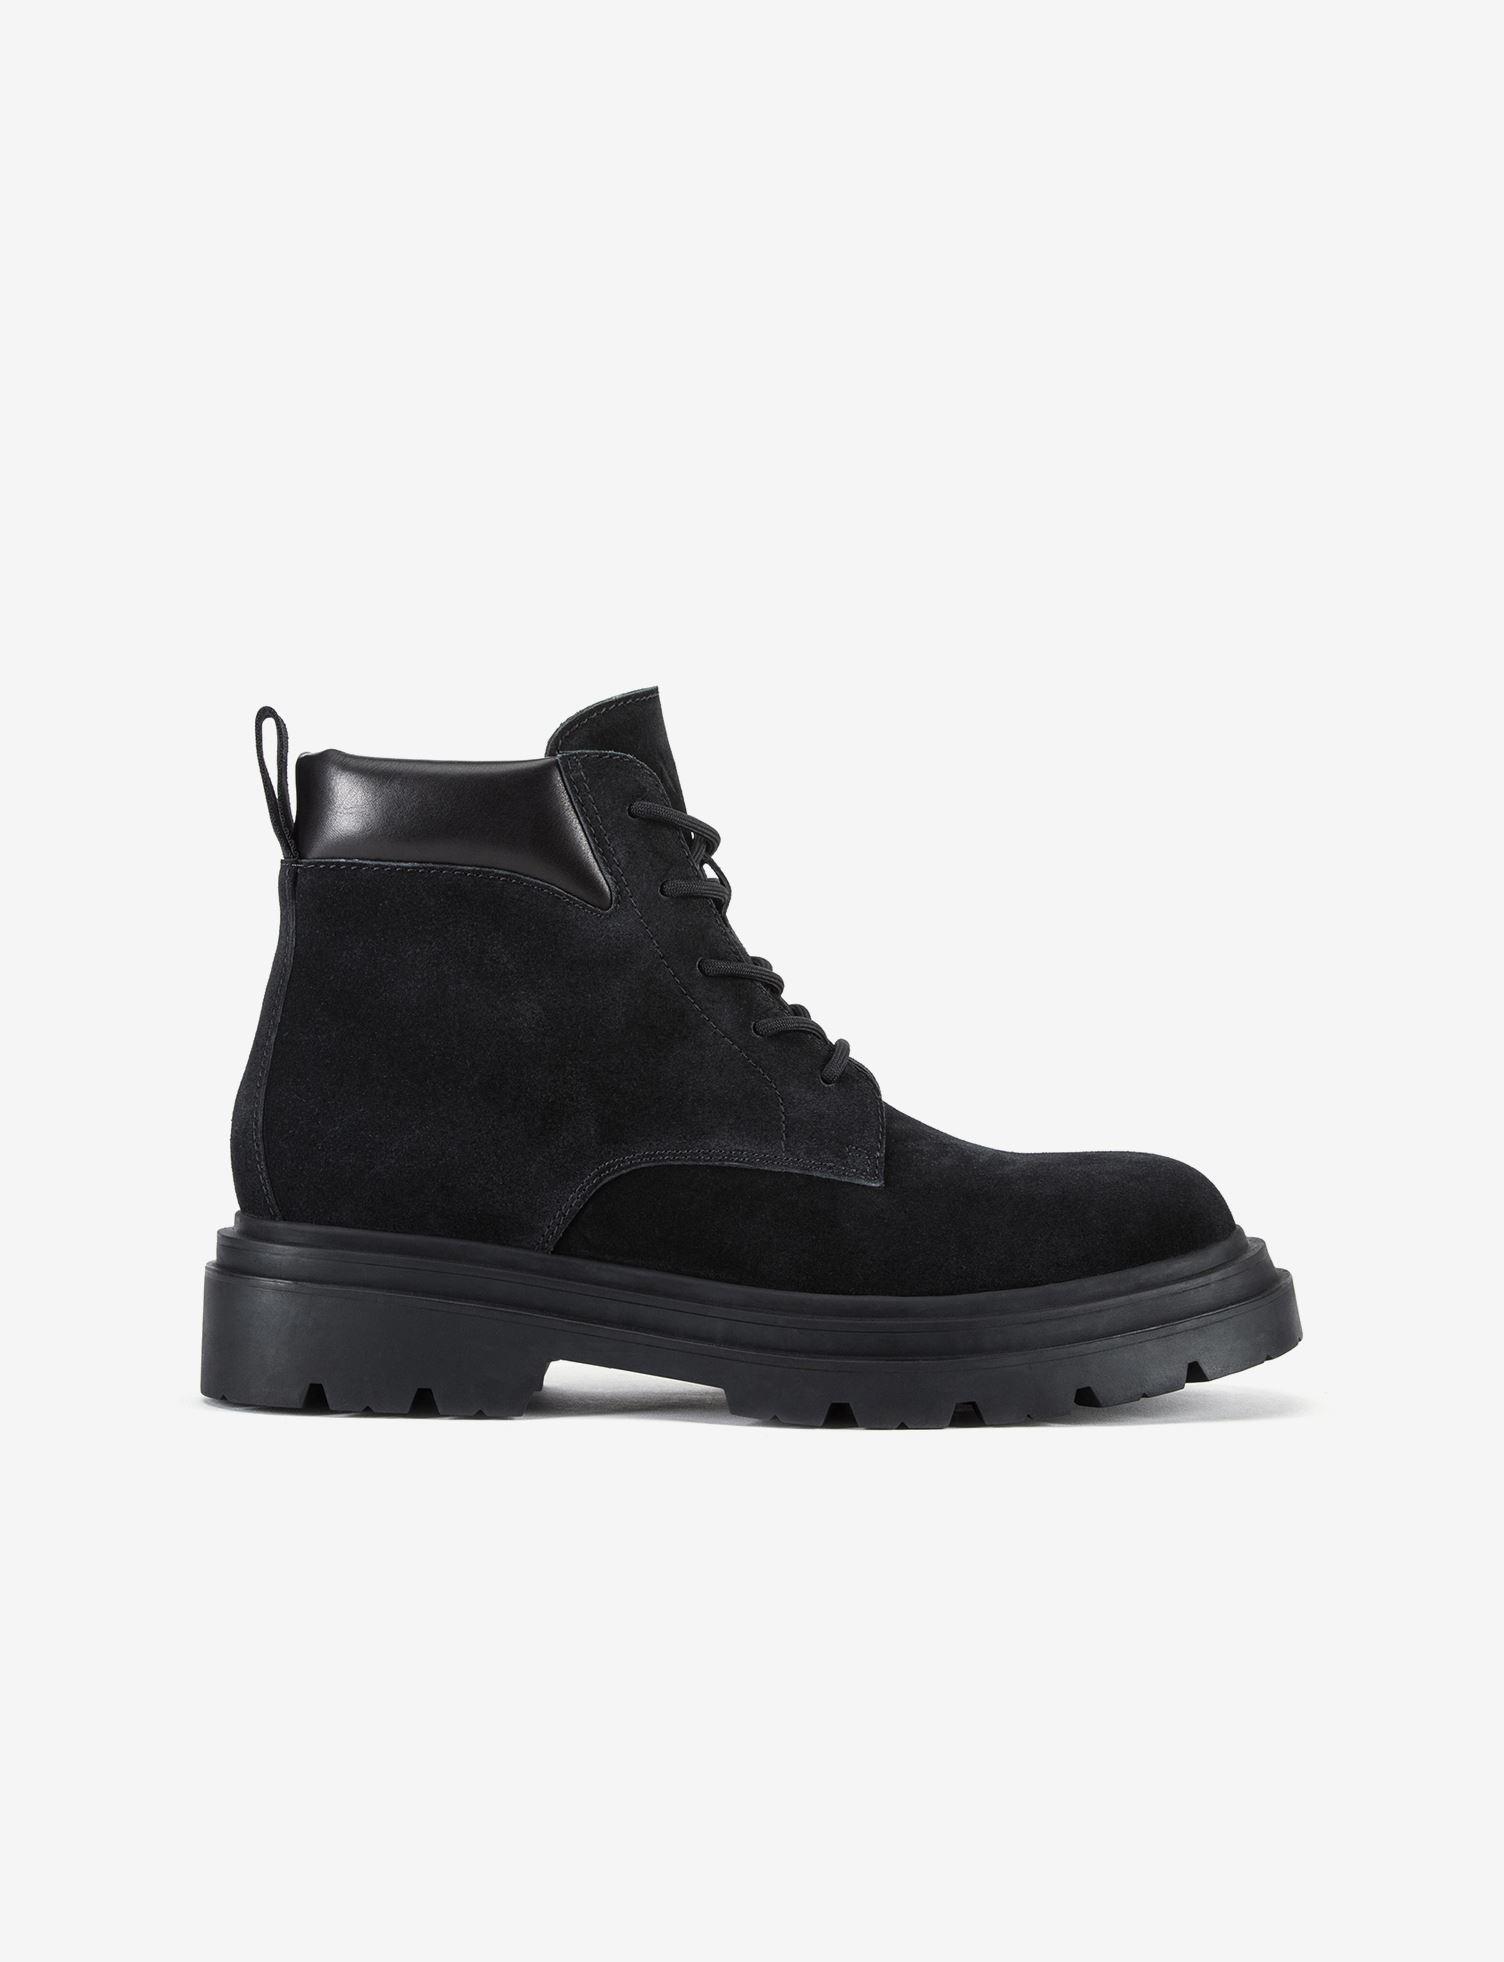 Armani Exchange Suede Boots in Black for Men - Lyst